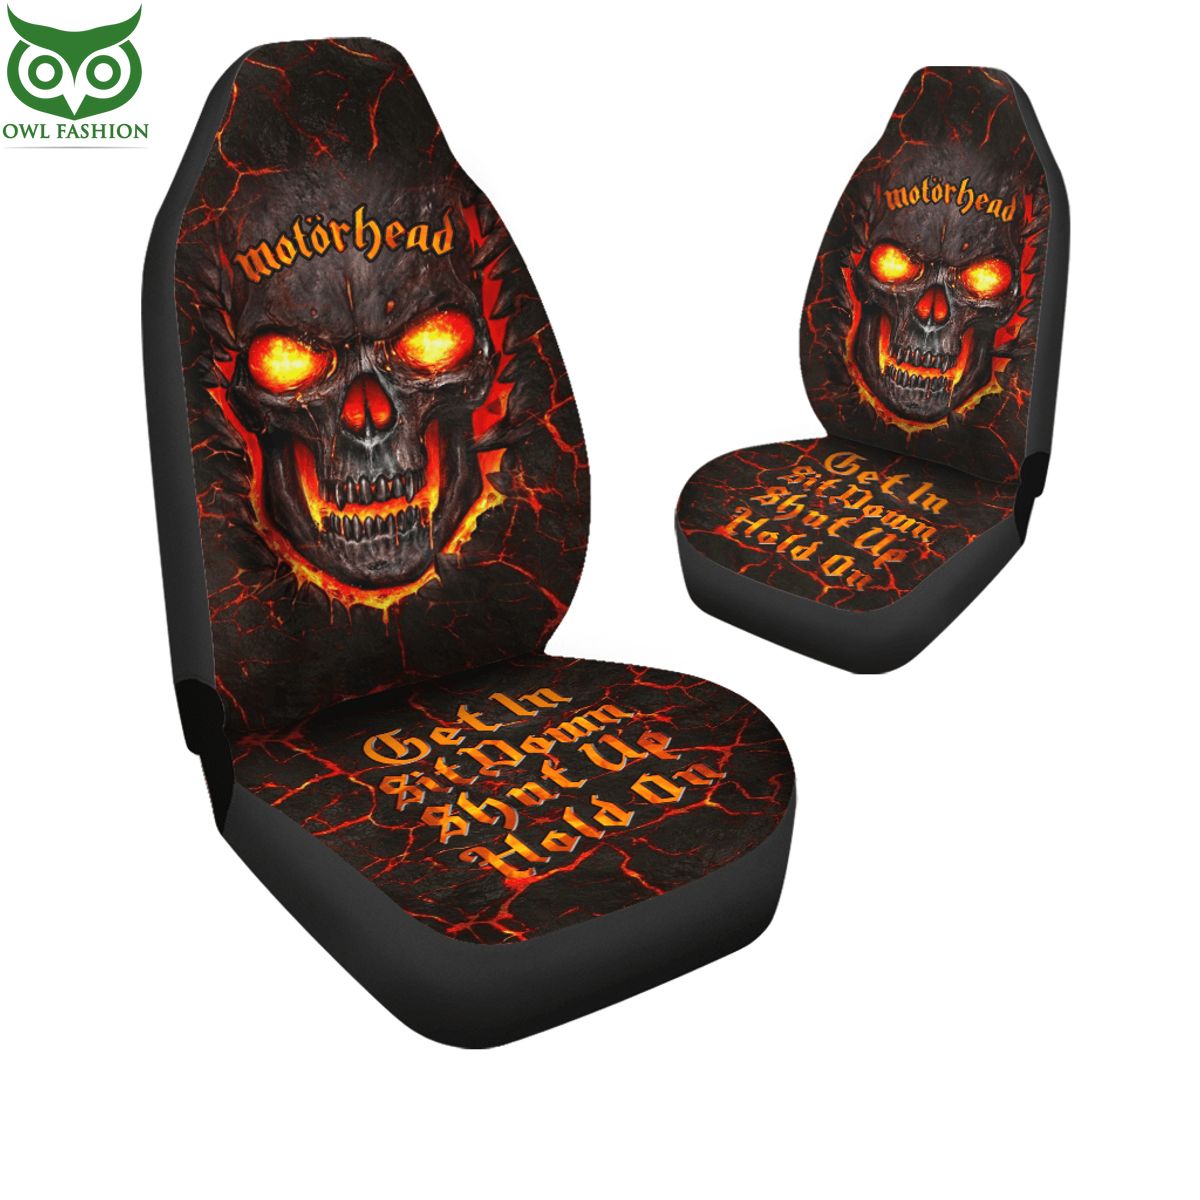 Motorhead Skull Fire Car Seat Cover You are getting me envious with your look